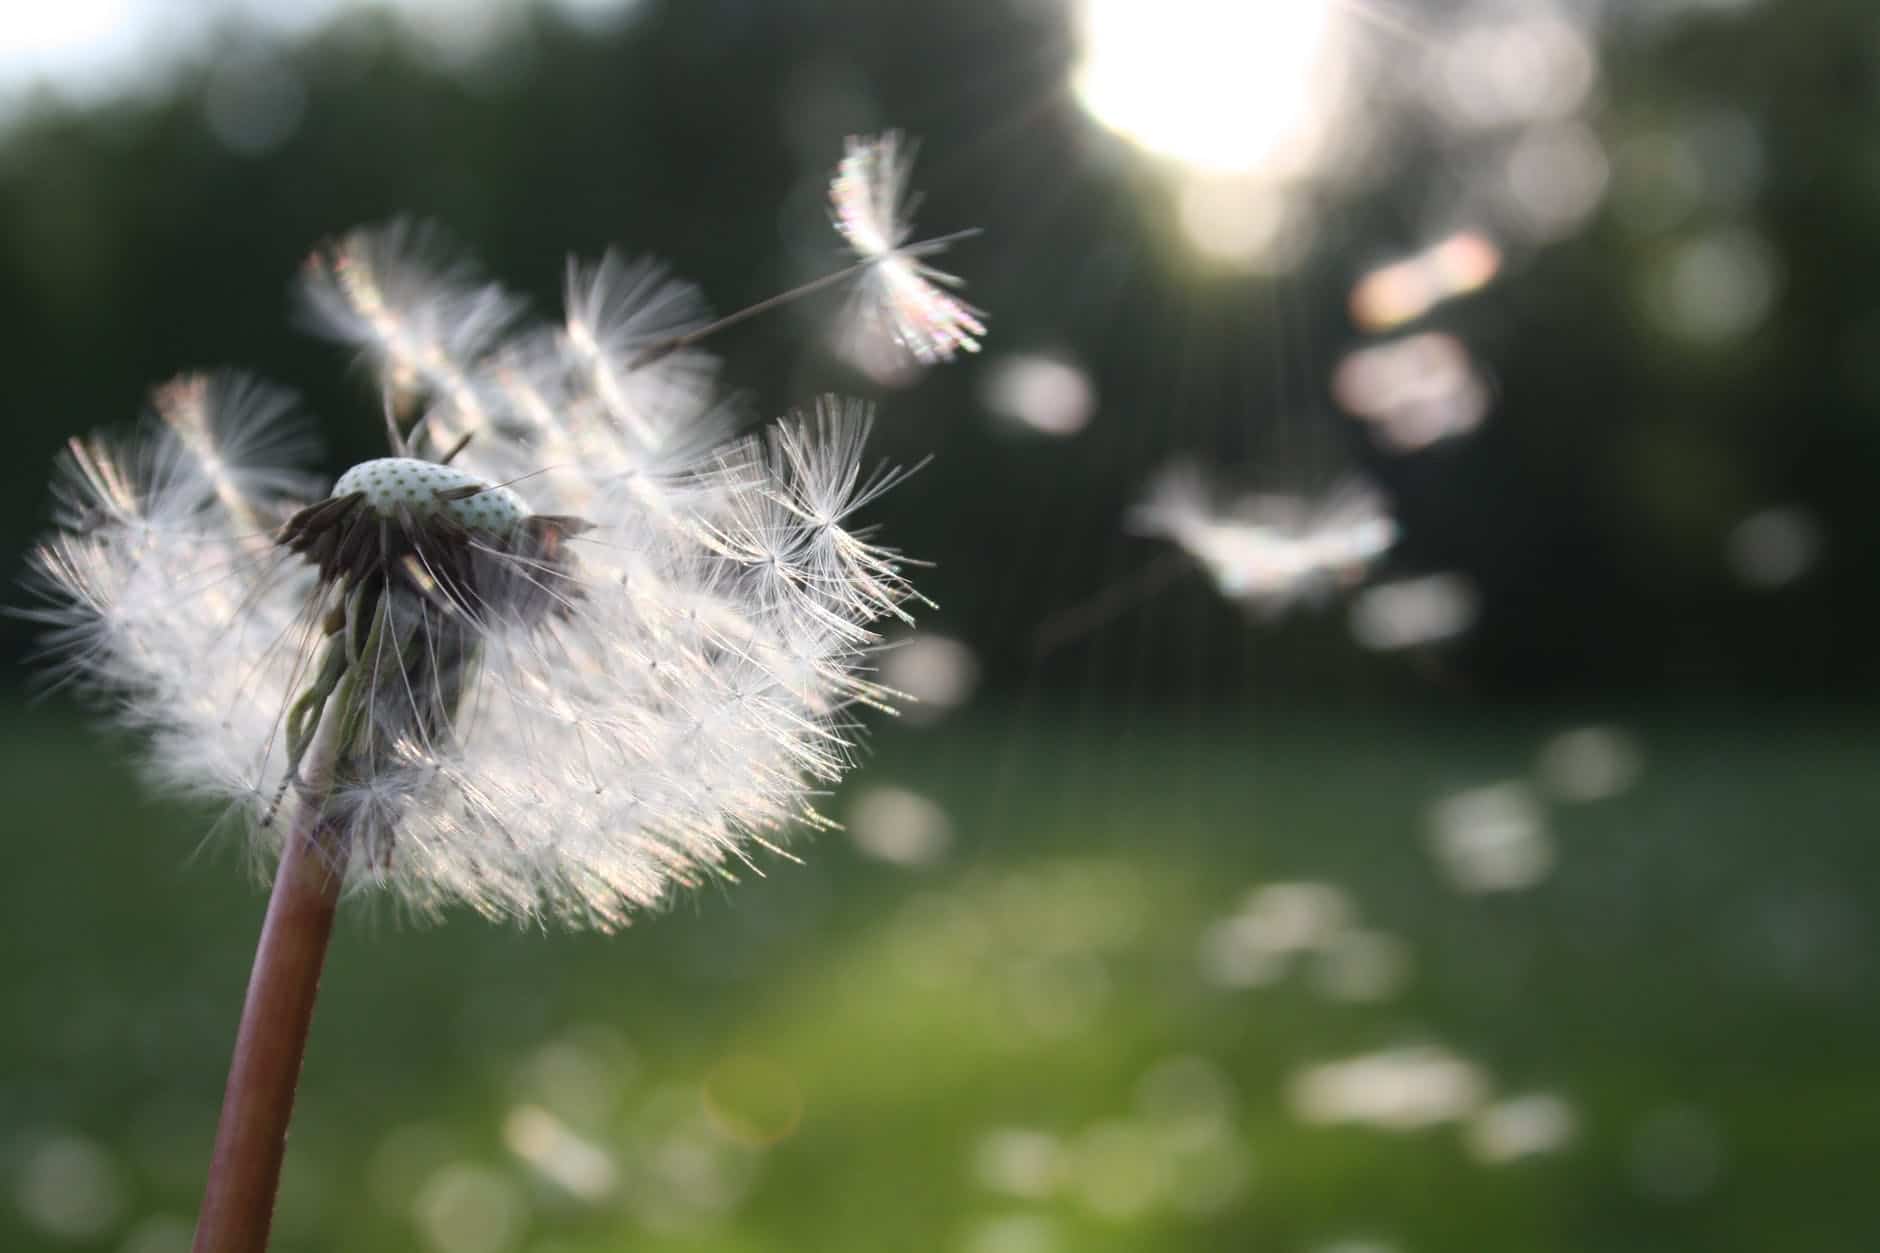 A dandelion with seeds.